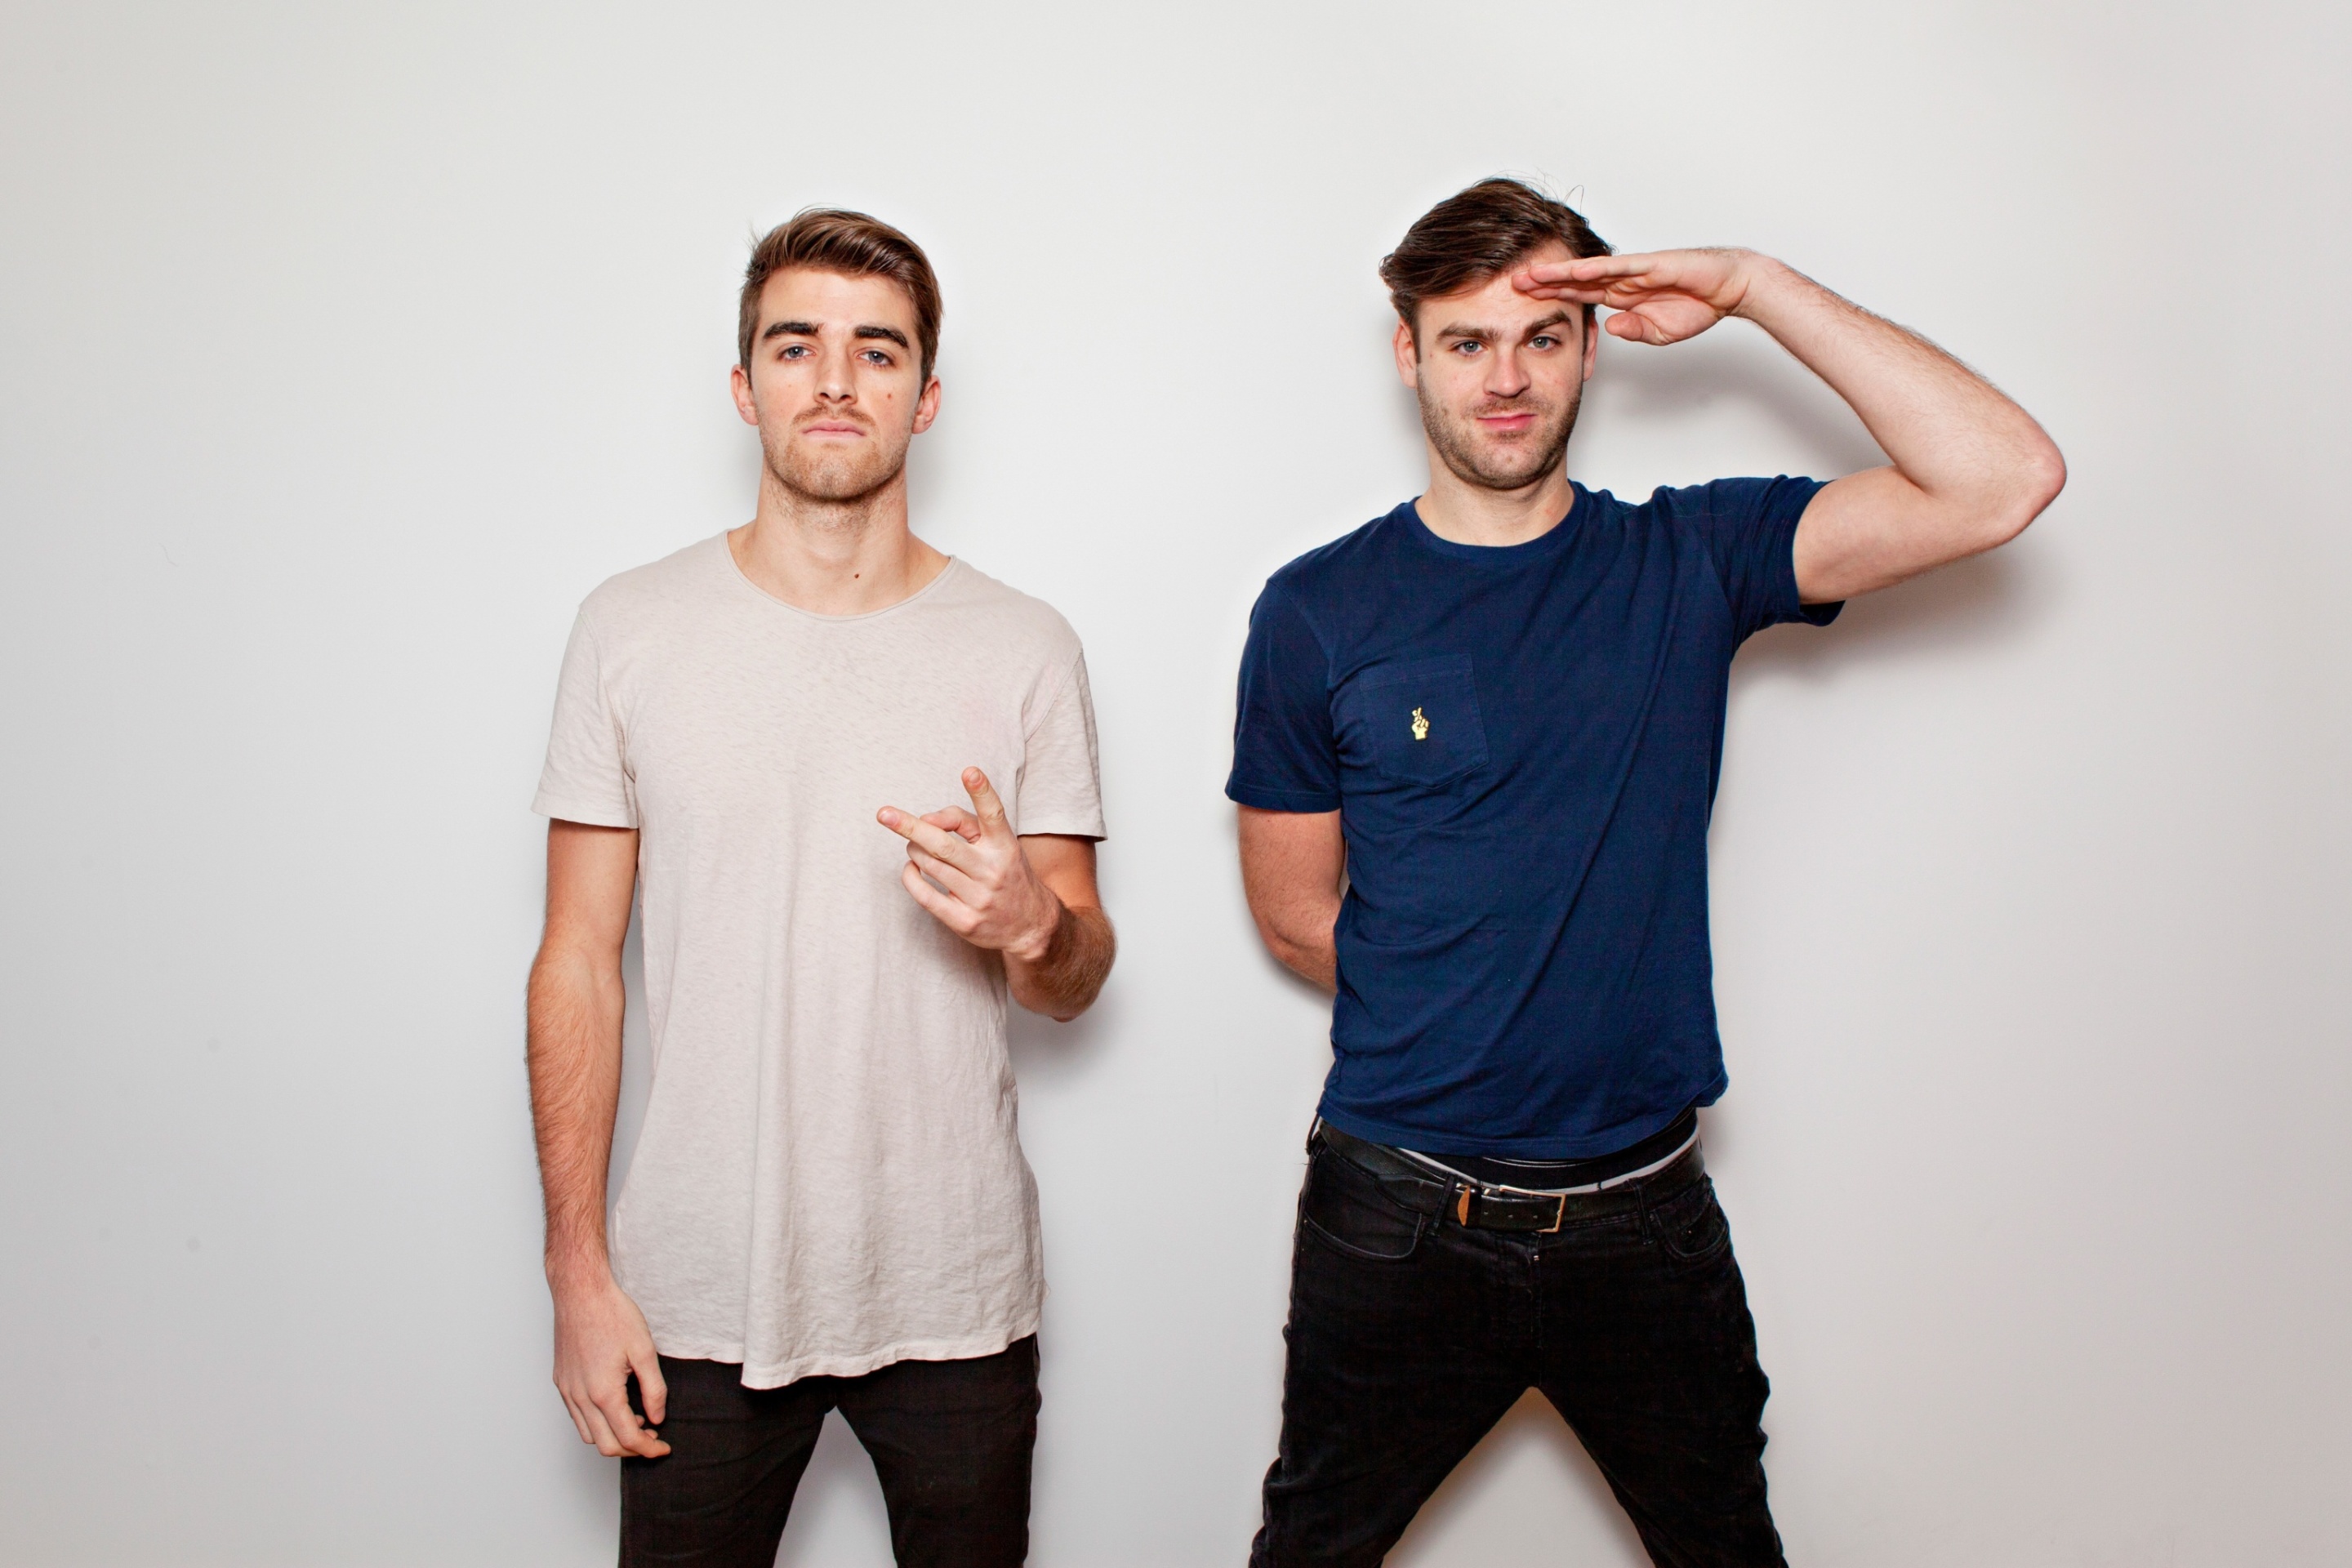 Fondo de pantalla The Chainsmokers with Andrew Taggart and Alex Pall 2880x1920